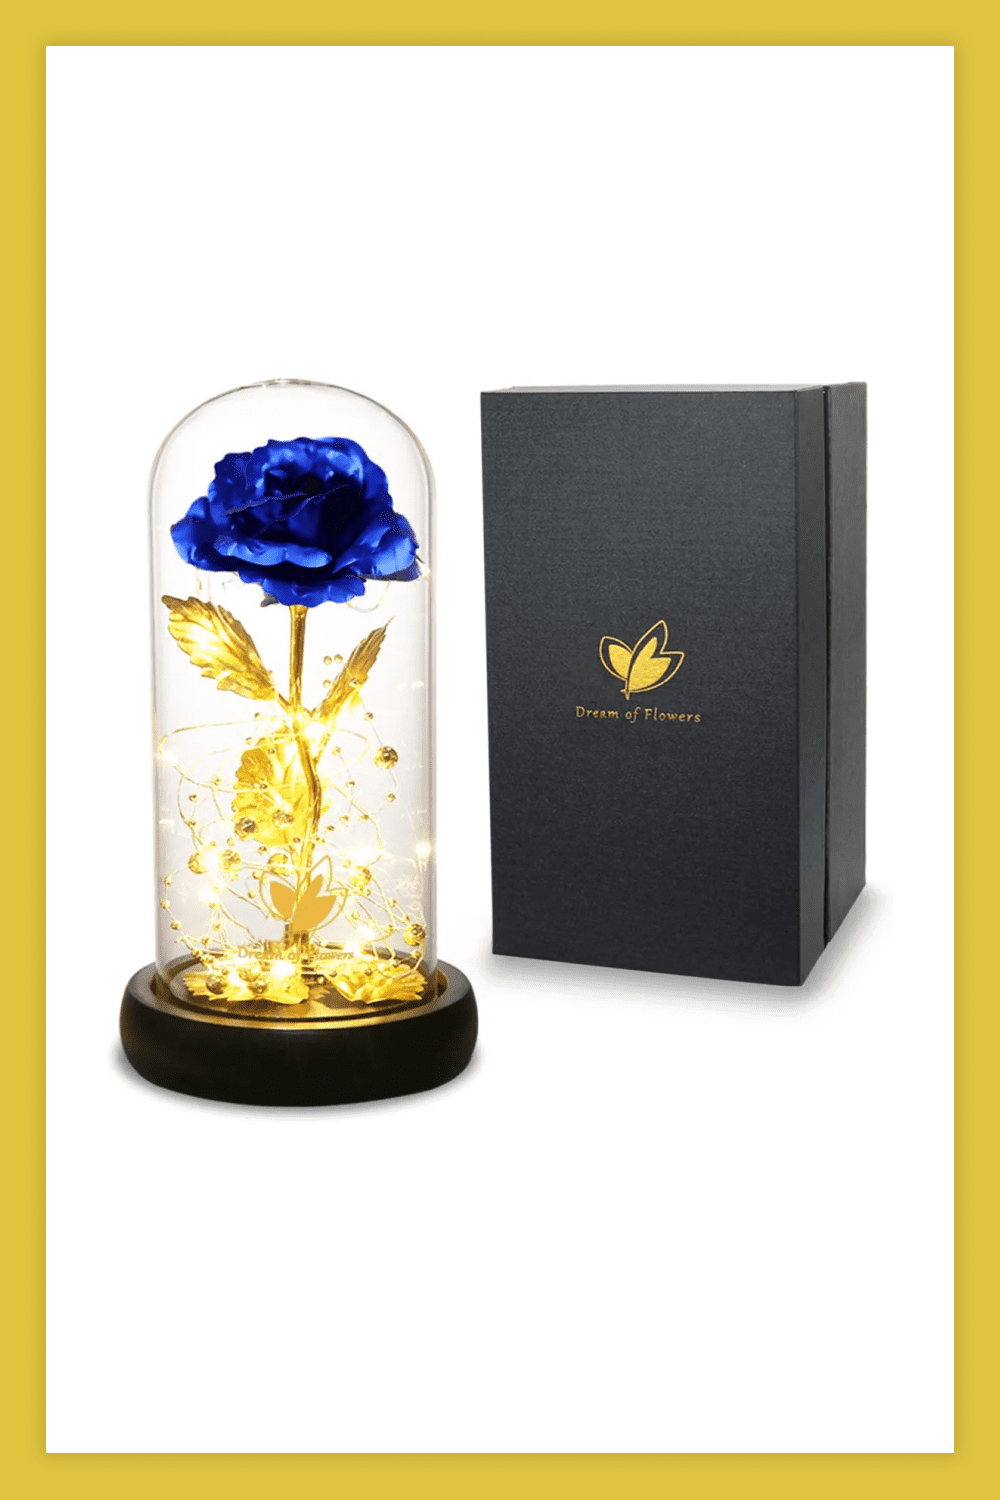 Gold and blue rose under glass.